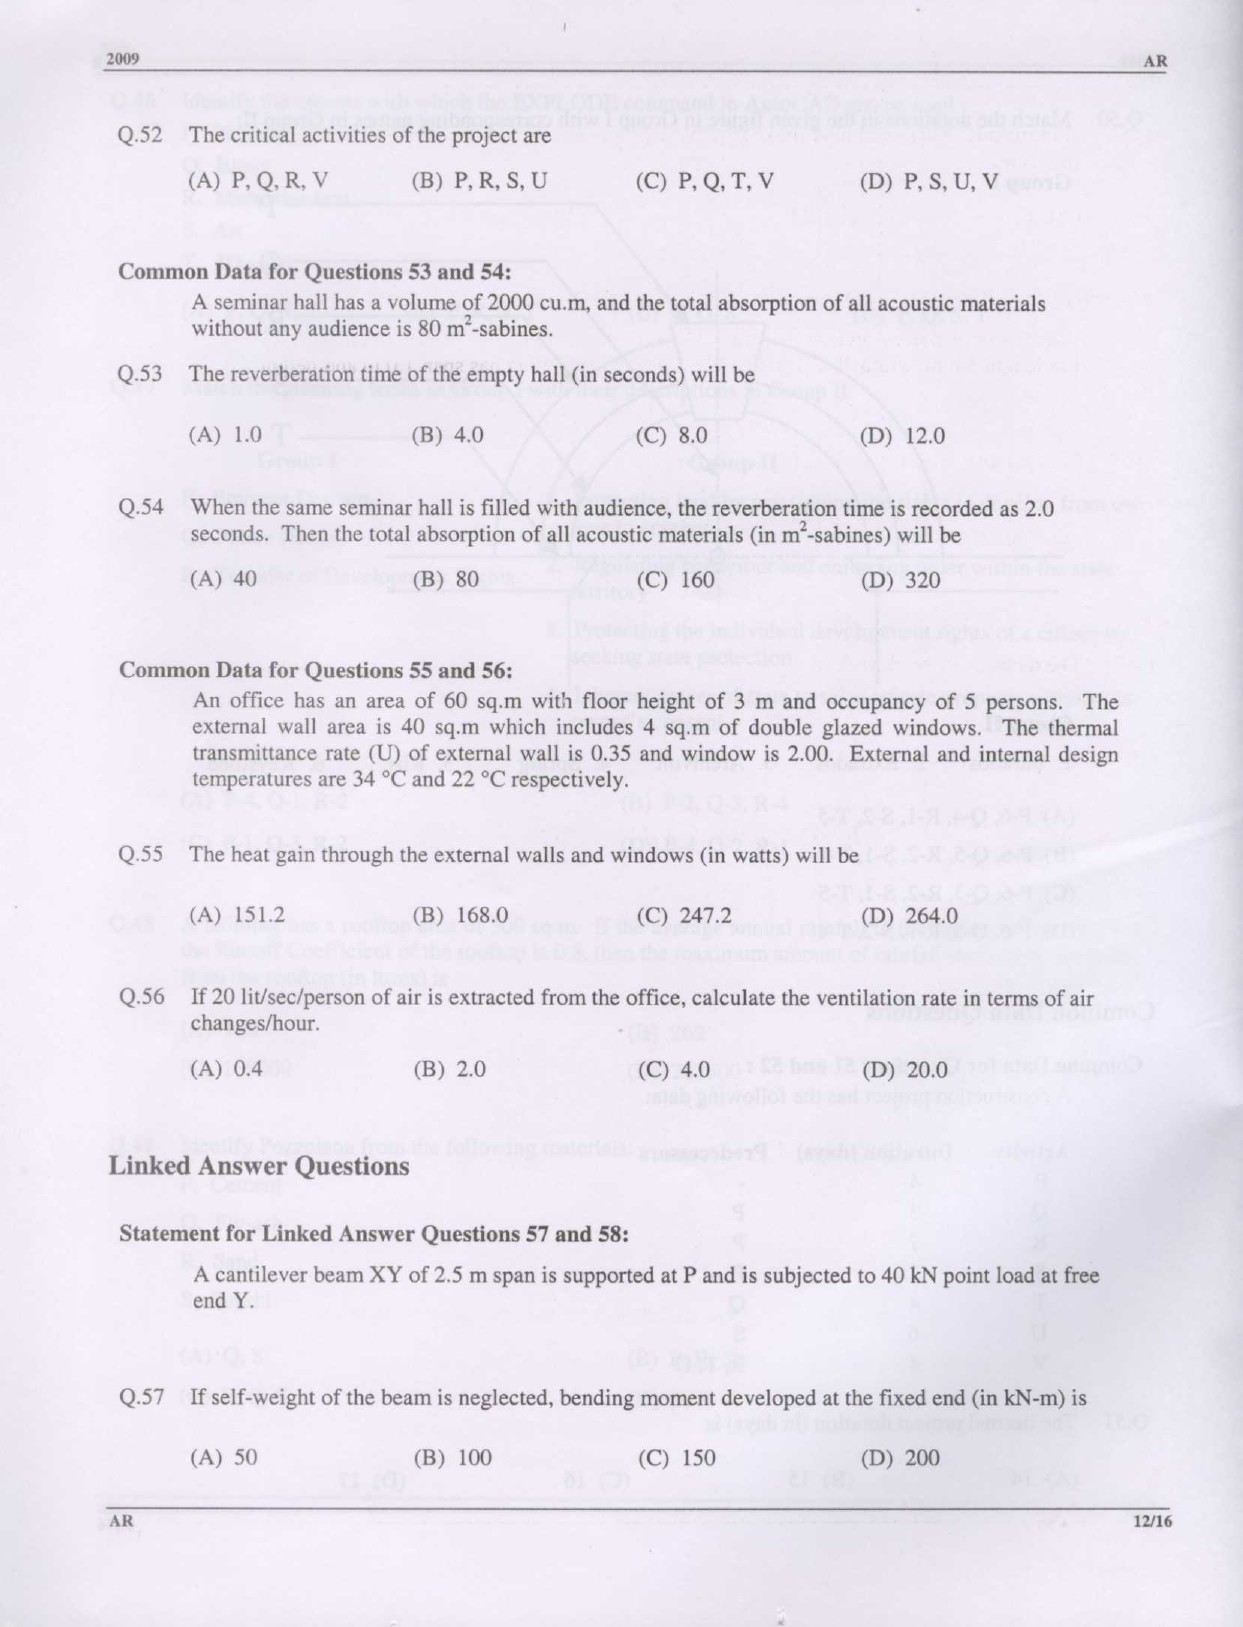 GATE Exam Question Paper 2009 Architecture and Planning 12